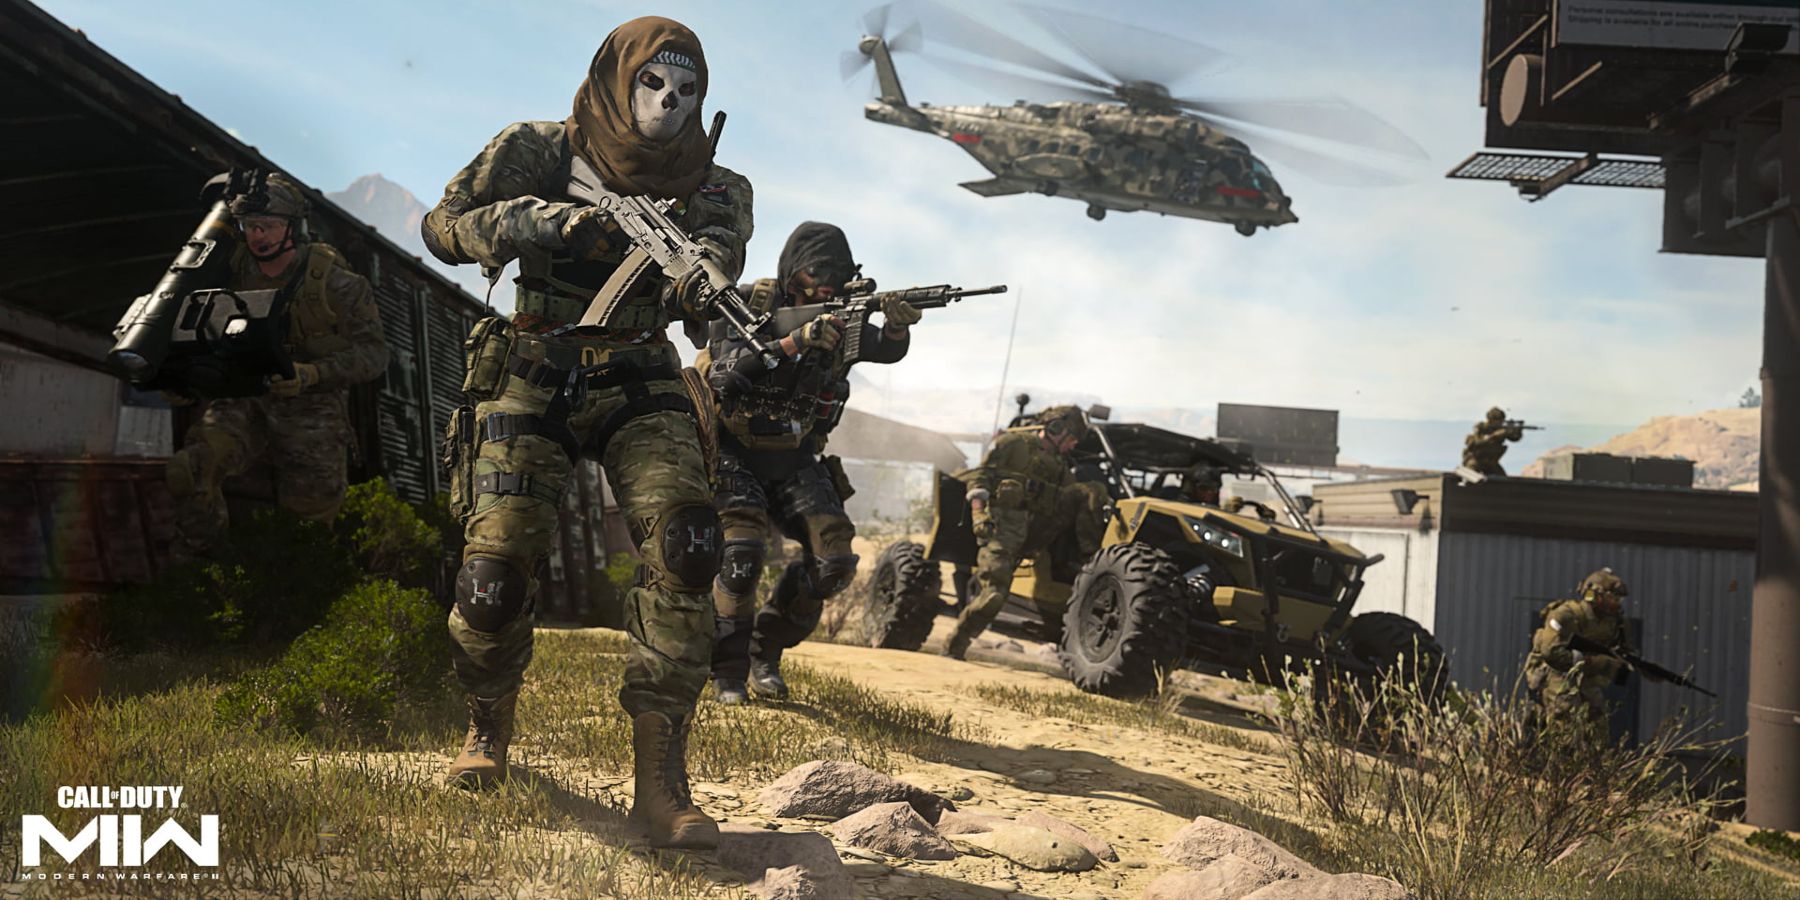 Modern Warfare 3's Metacritic score is a new low for the Call of Duty  series : r/gamingnews